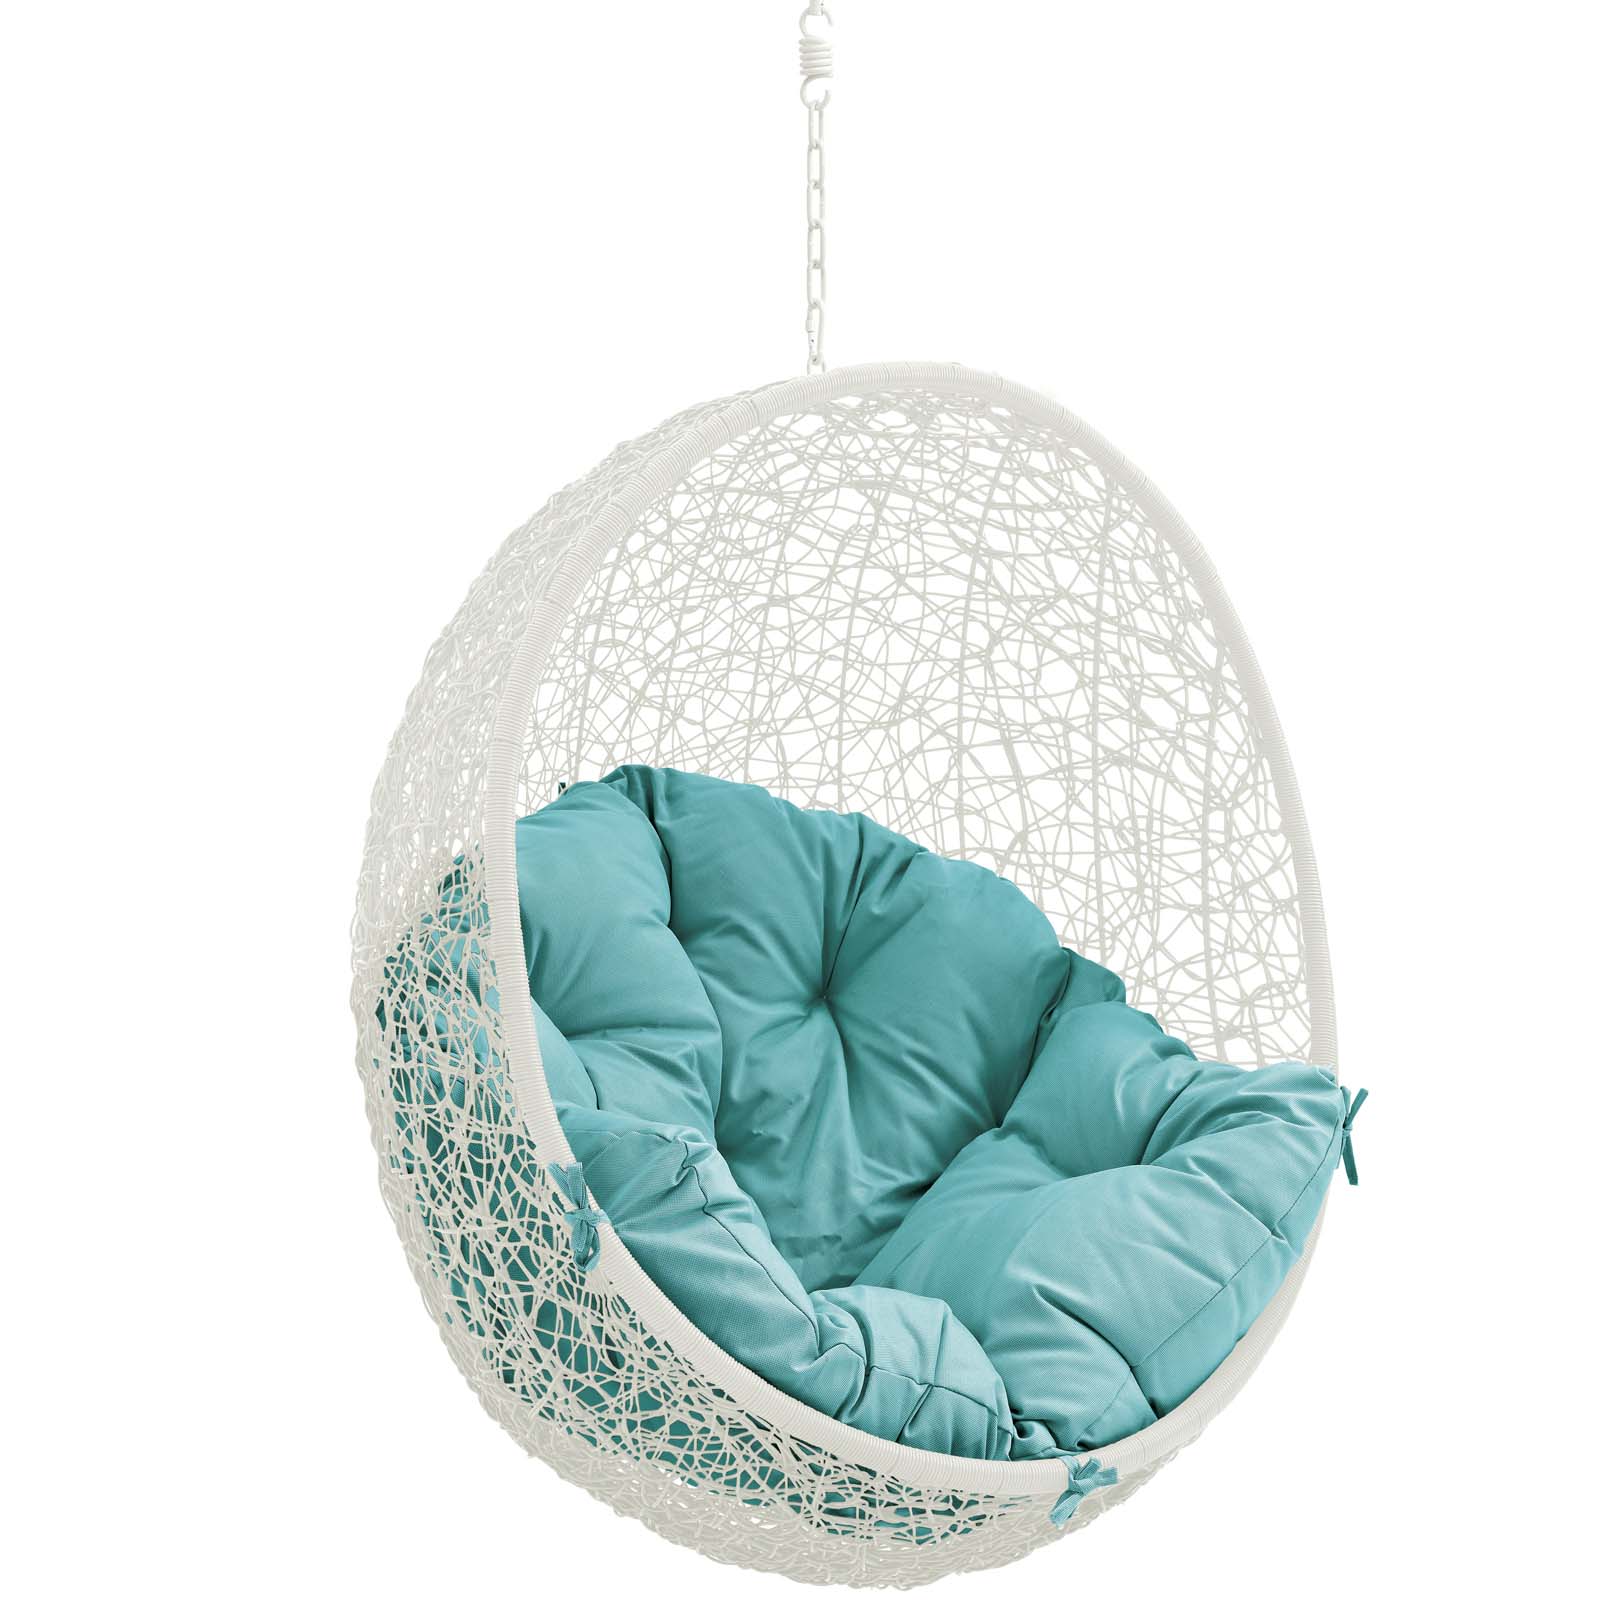 Modway Outdoor Conversation Sets - Hide-Outdoor-Patio-Swing-Chair-Without-Stand-White-Turquoise